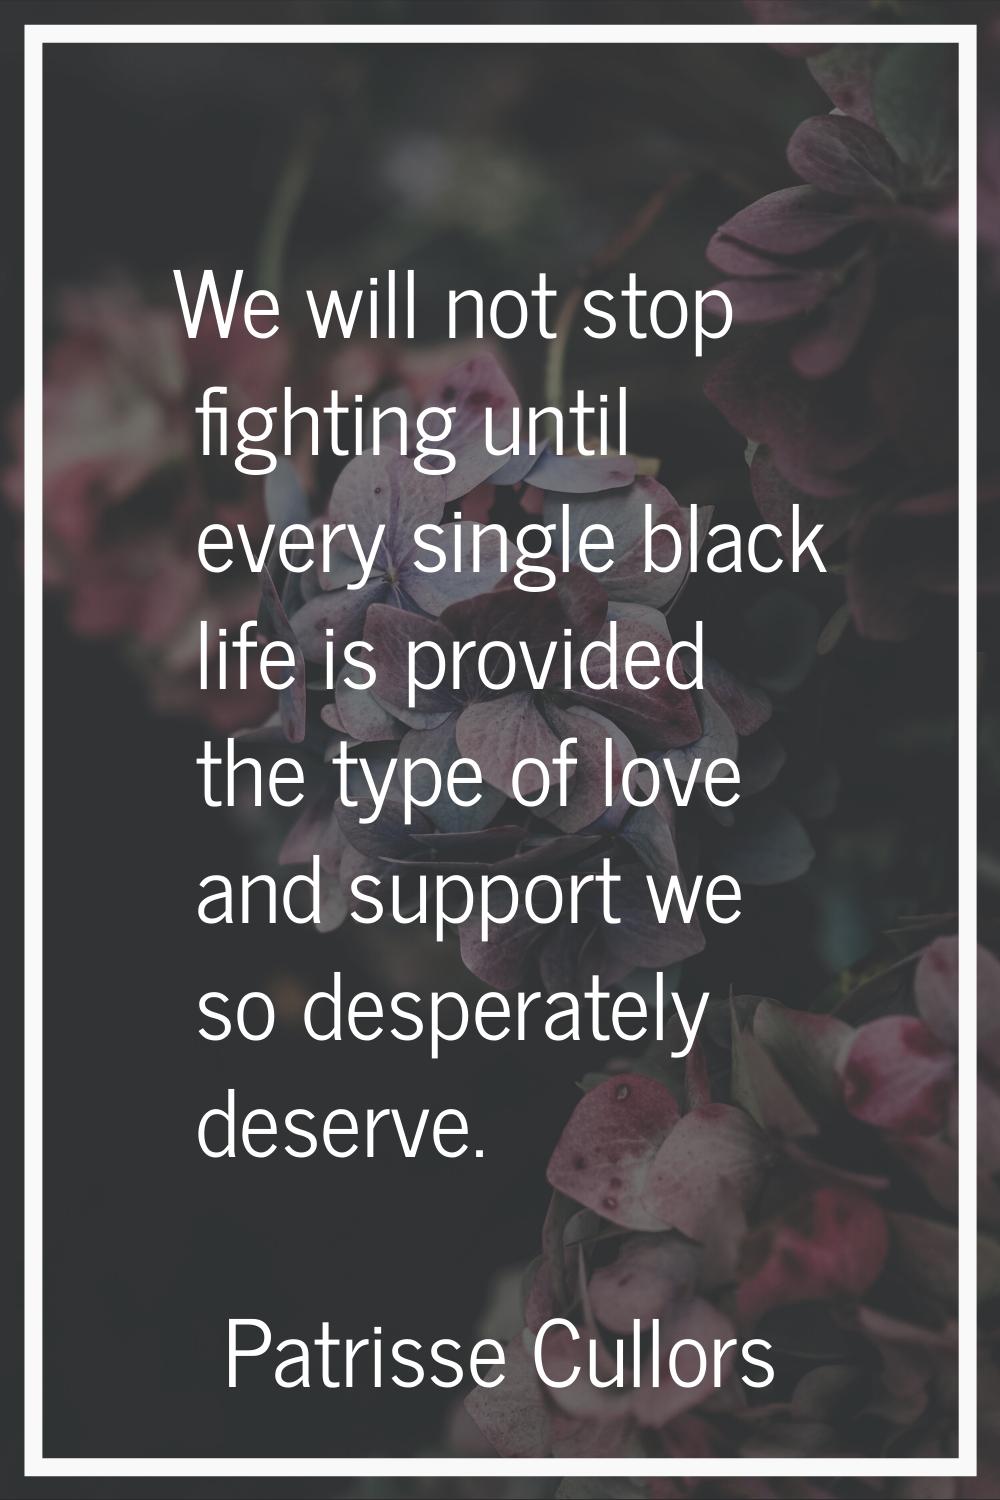 We will not stop fighting until every single black life is provided the type of love and support we